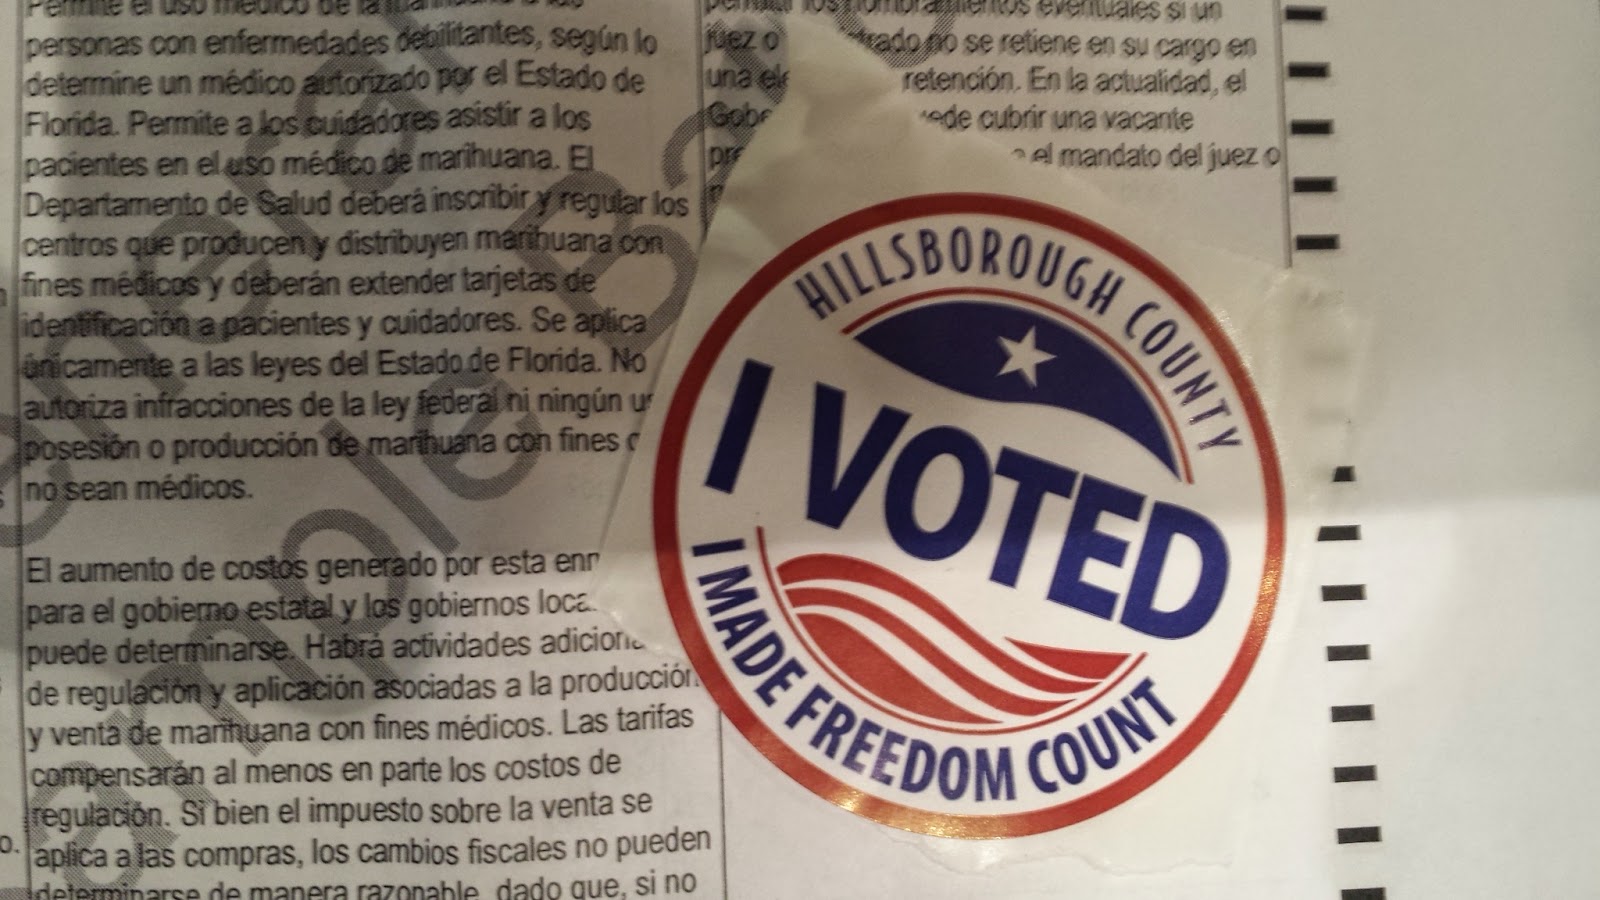 Early Voting started today in Hillsborough County, FL 